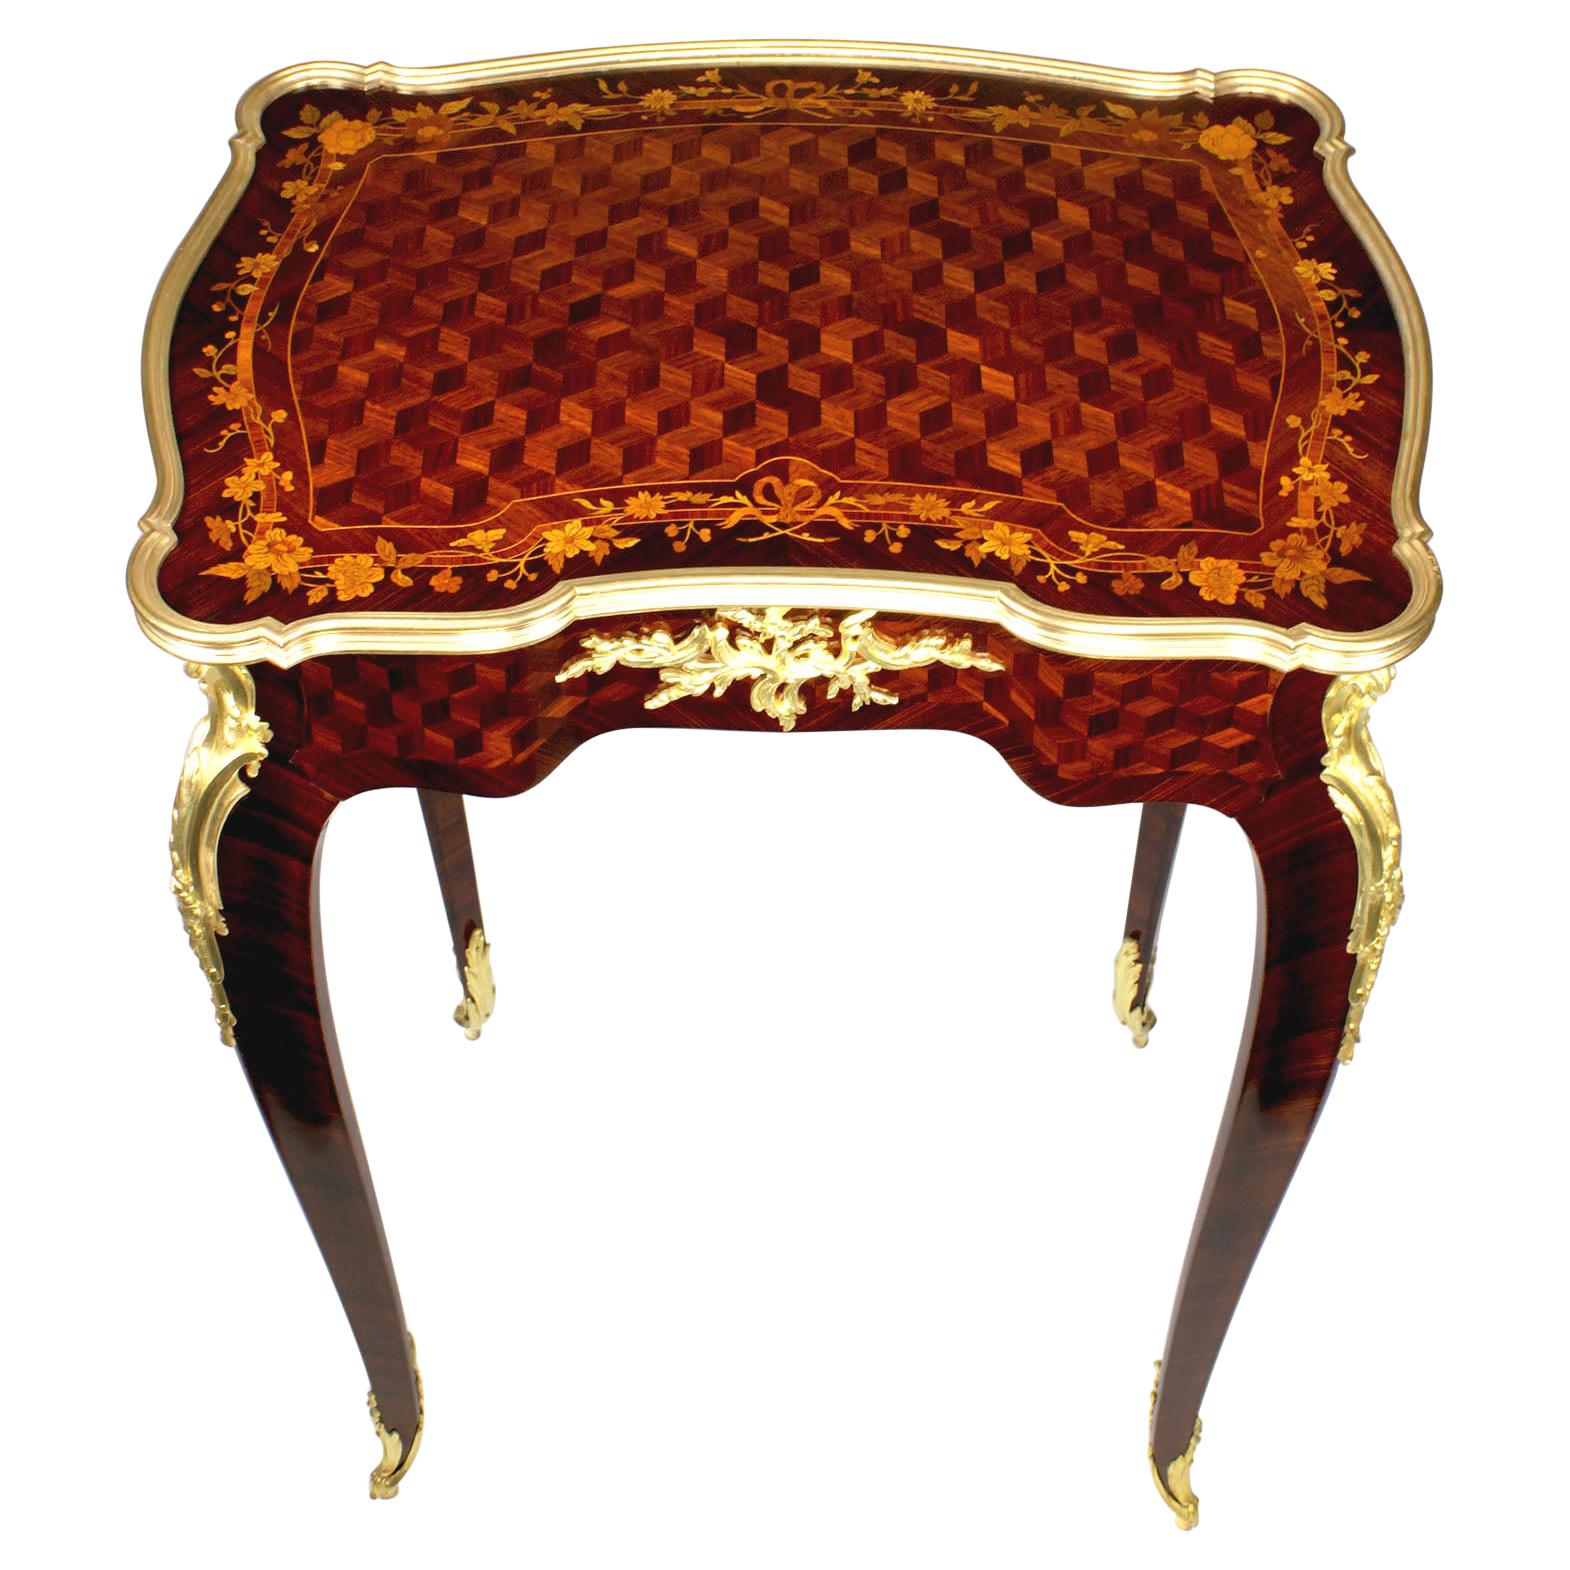 Fine French Louis XV Style Ormolu Mounted Marquetry Side-Table by François Linke